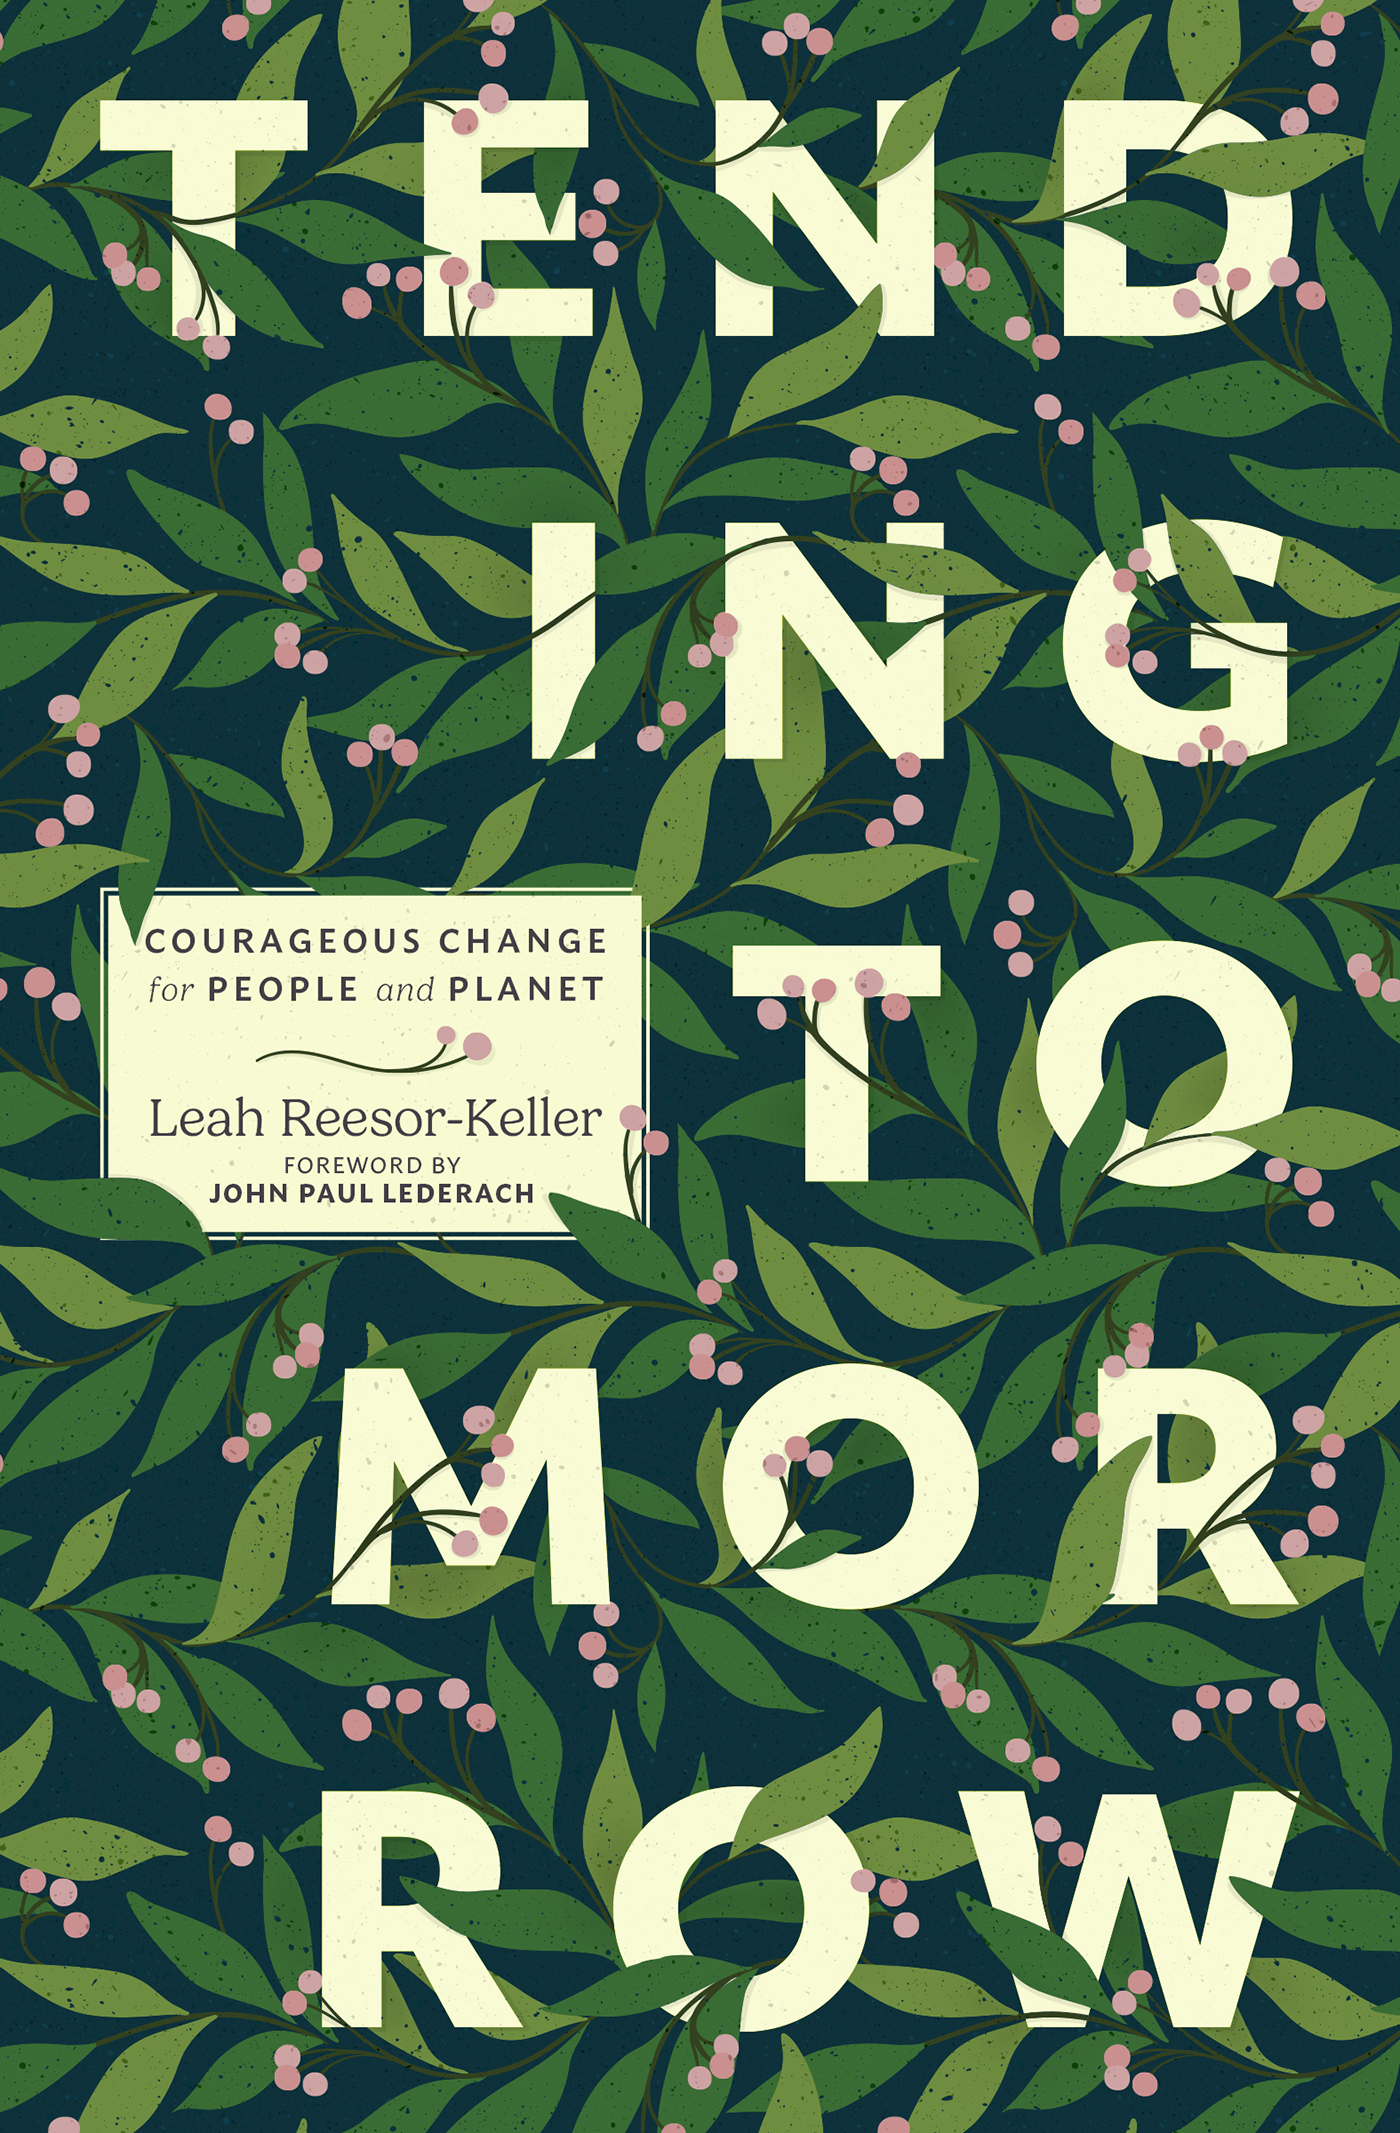 Background of green leaves with words "Tending Tomorrow: Courageous Change for People and Planet" on the front 